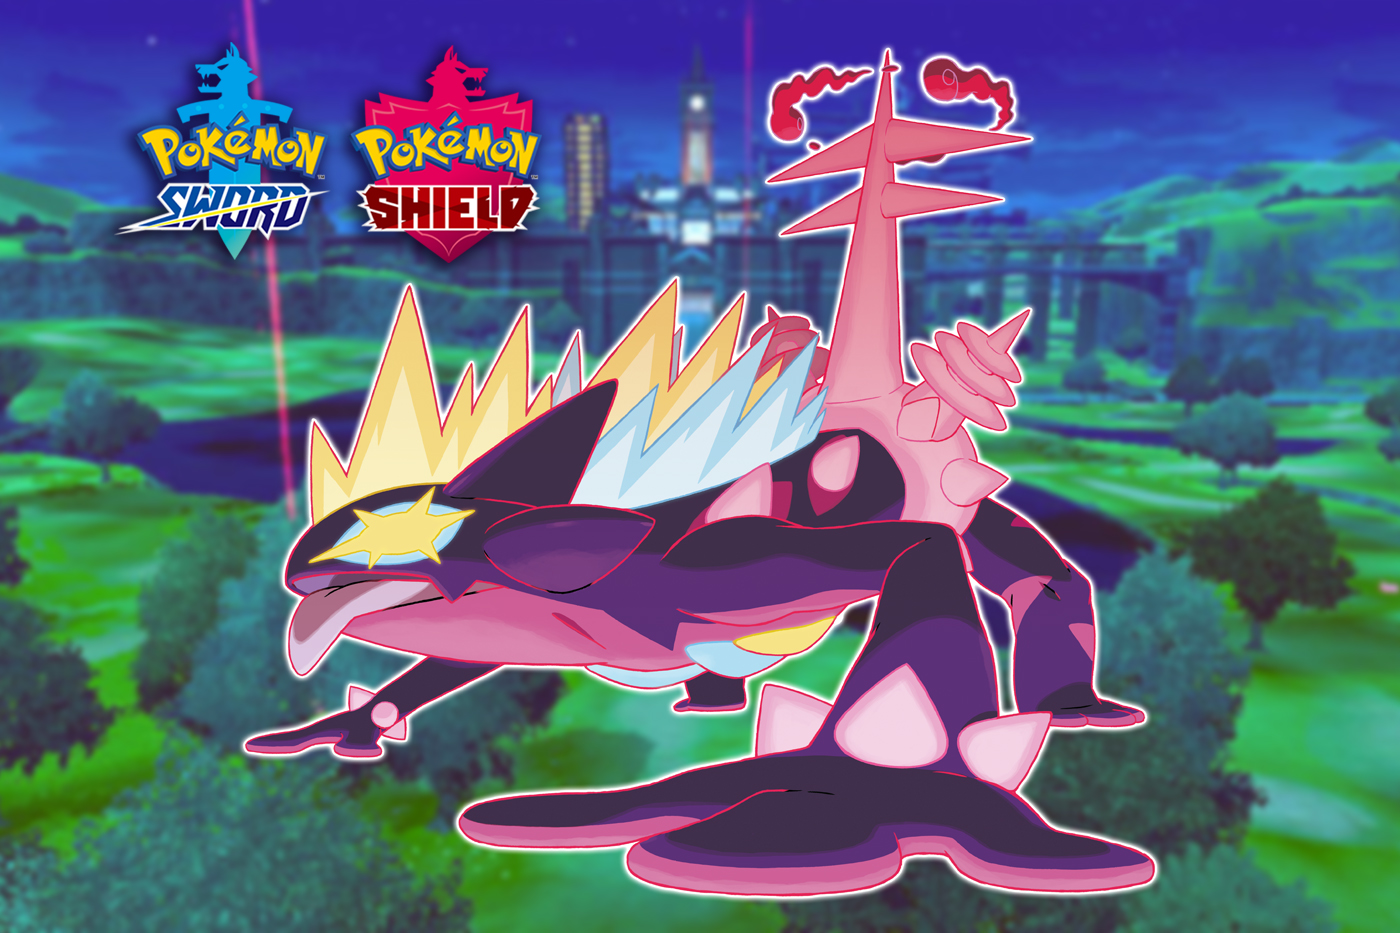 Pokemon Sword and Shield Toxtricity